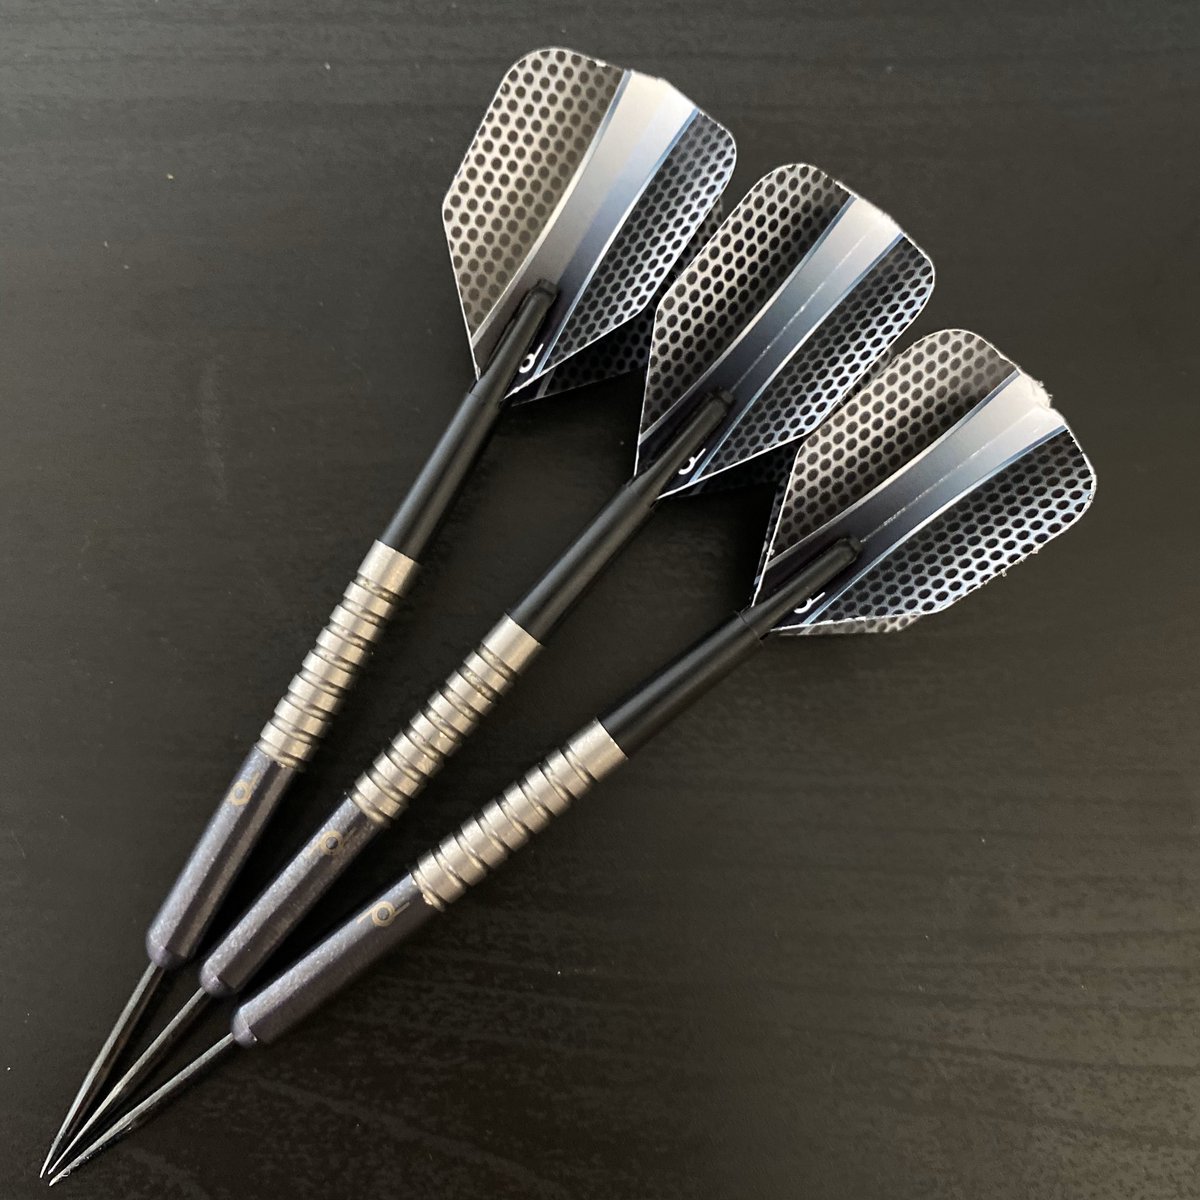 Dart Reviews on Twitter: "Latest review: Performance darts 50/50 @PerformanceDart #dartreview #Darts #PerformanceDarts https://t.co/vfXHHIXsDC" / Twitter